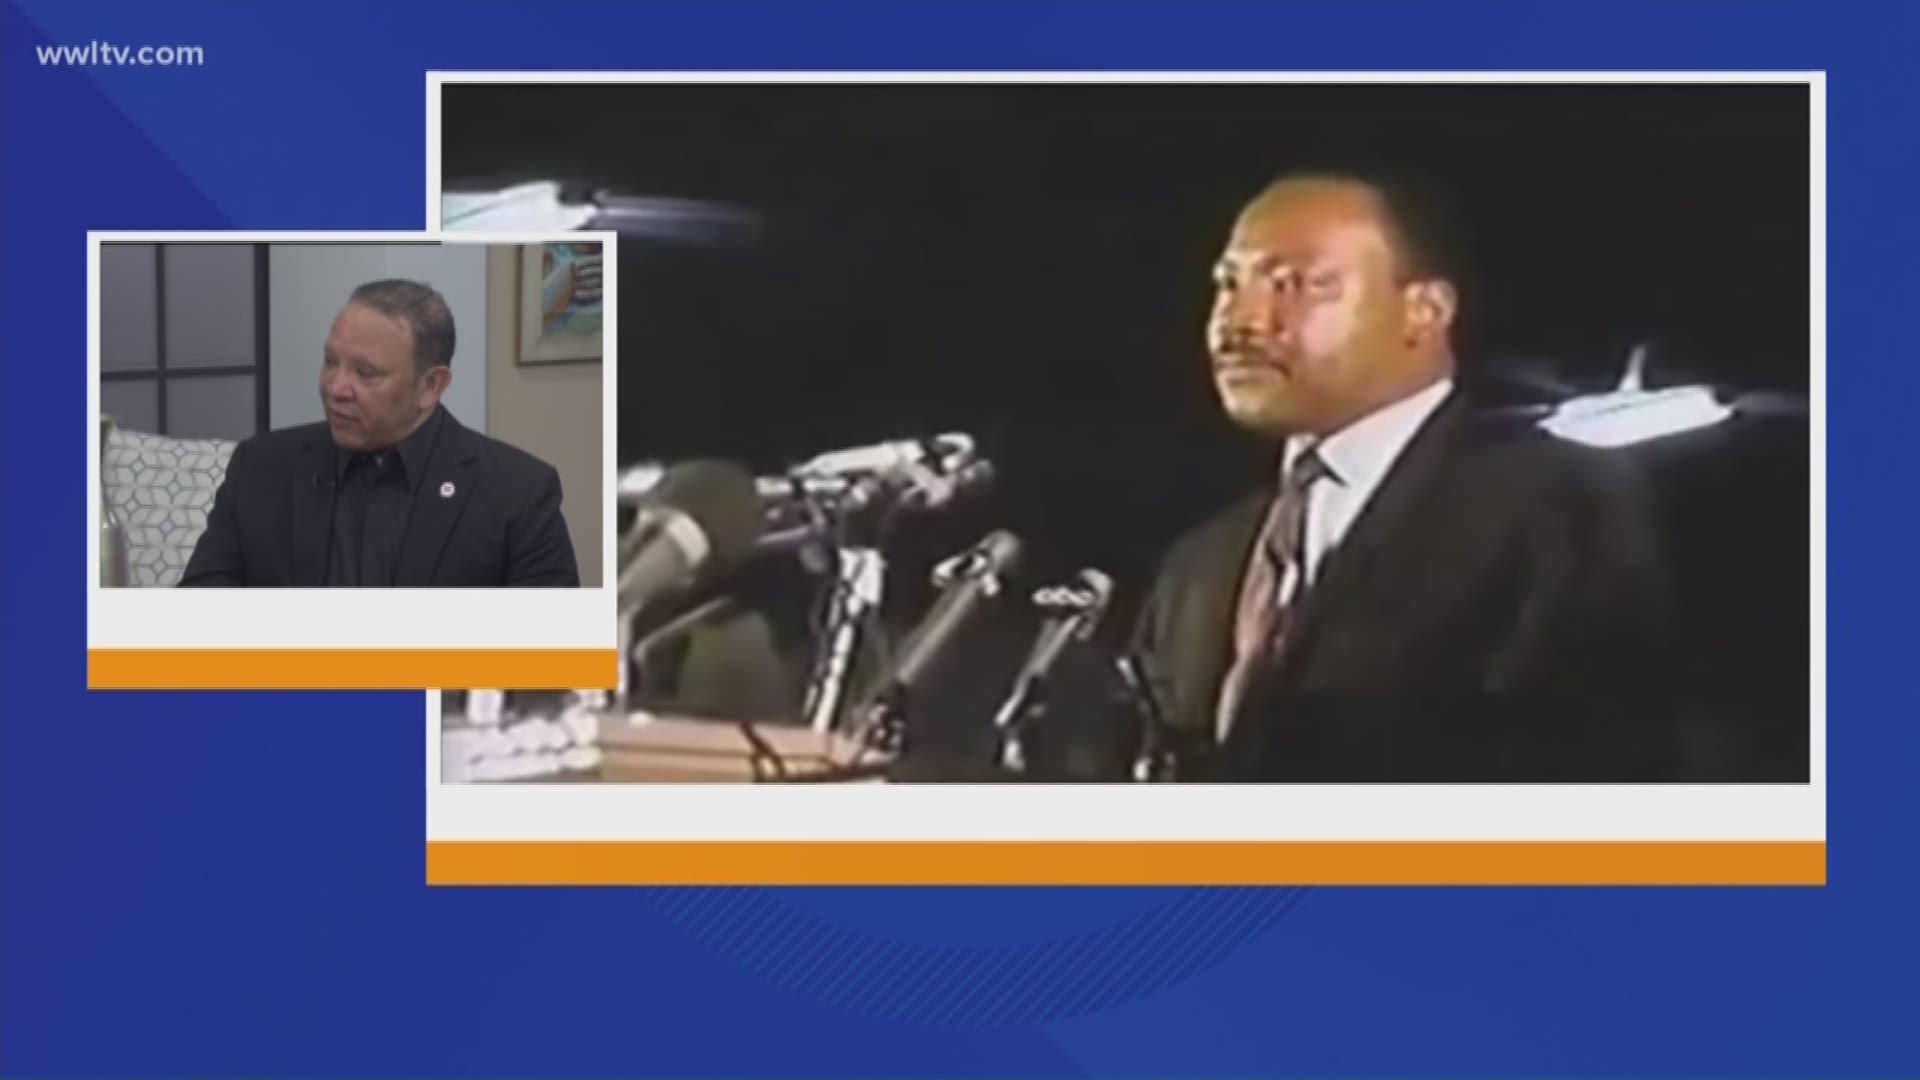 National Urban League president & former mayor Marc Morial discusses the events taking place in the city to commemorate the life of the Reverend Dr. Martin Luther King Jr.